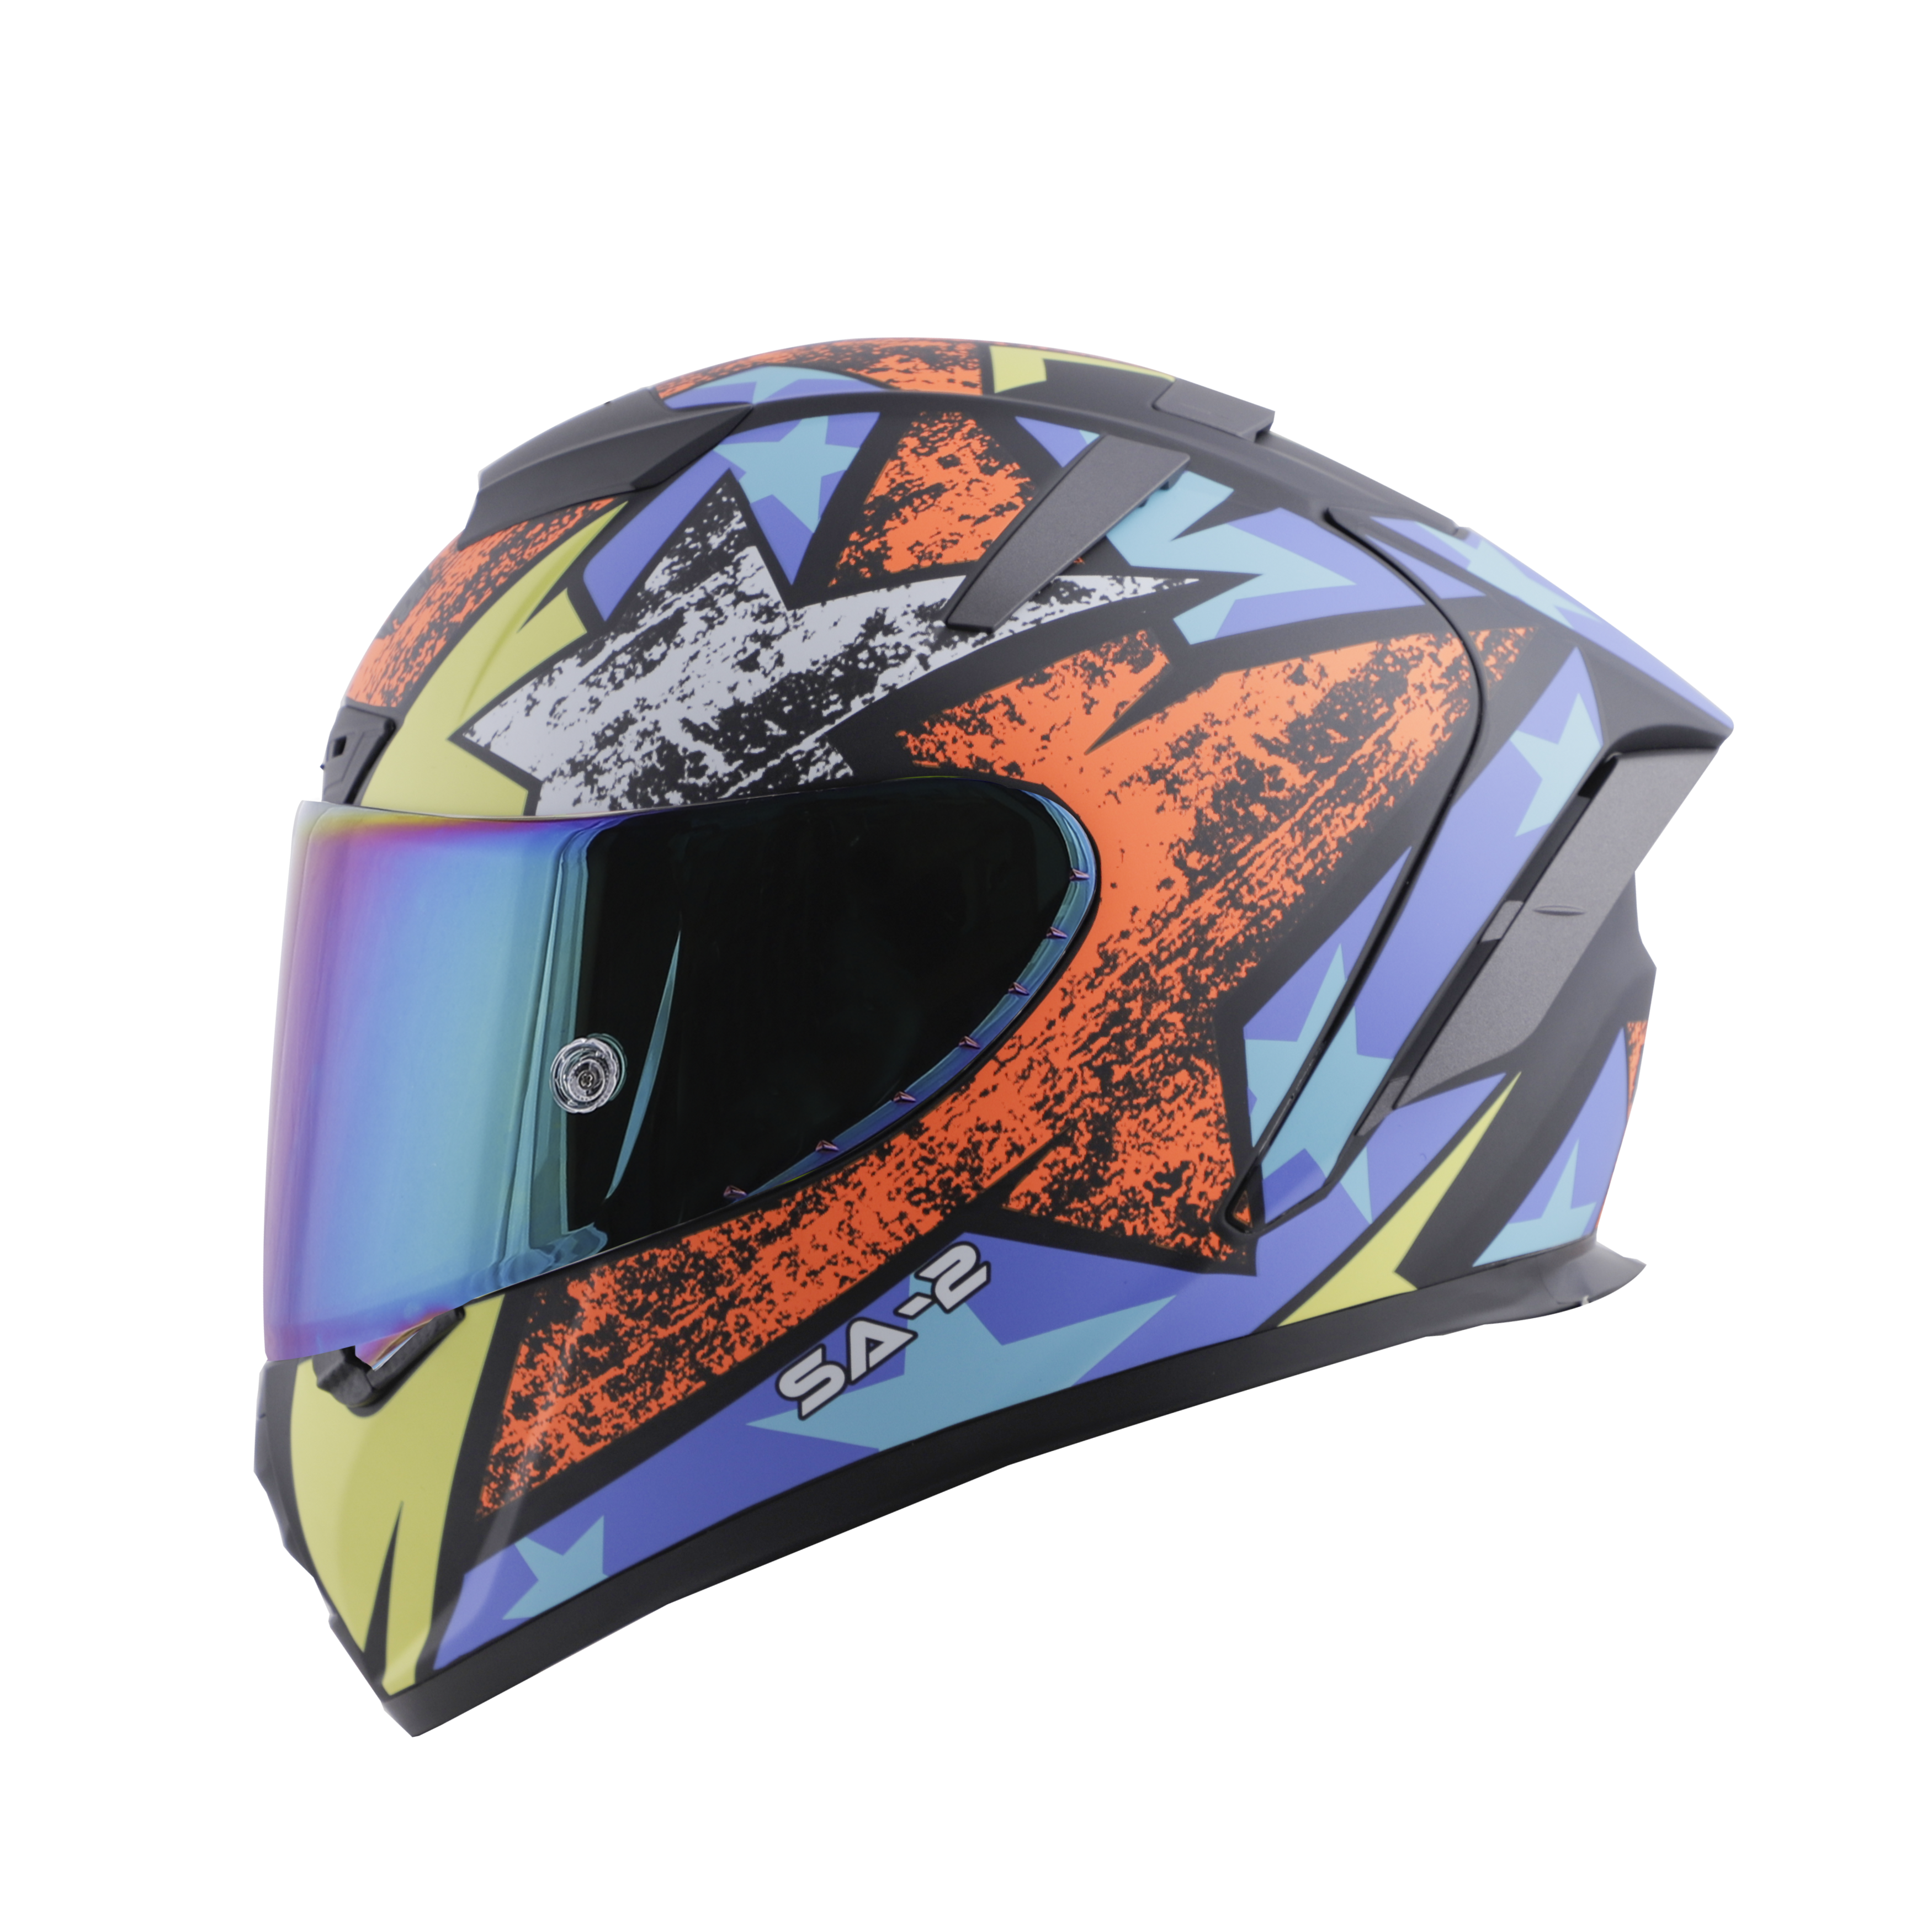 SA-2 STAR MAT BLACK WITH ORANGE FITTED WITH CLEAR VISOR EXTRA CHROME RAINBOW VISOR FREE (WITH ANTI-FOG SHIELD HOLDER)